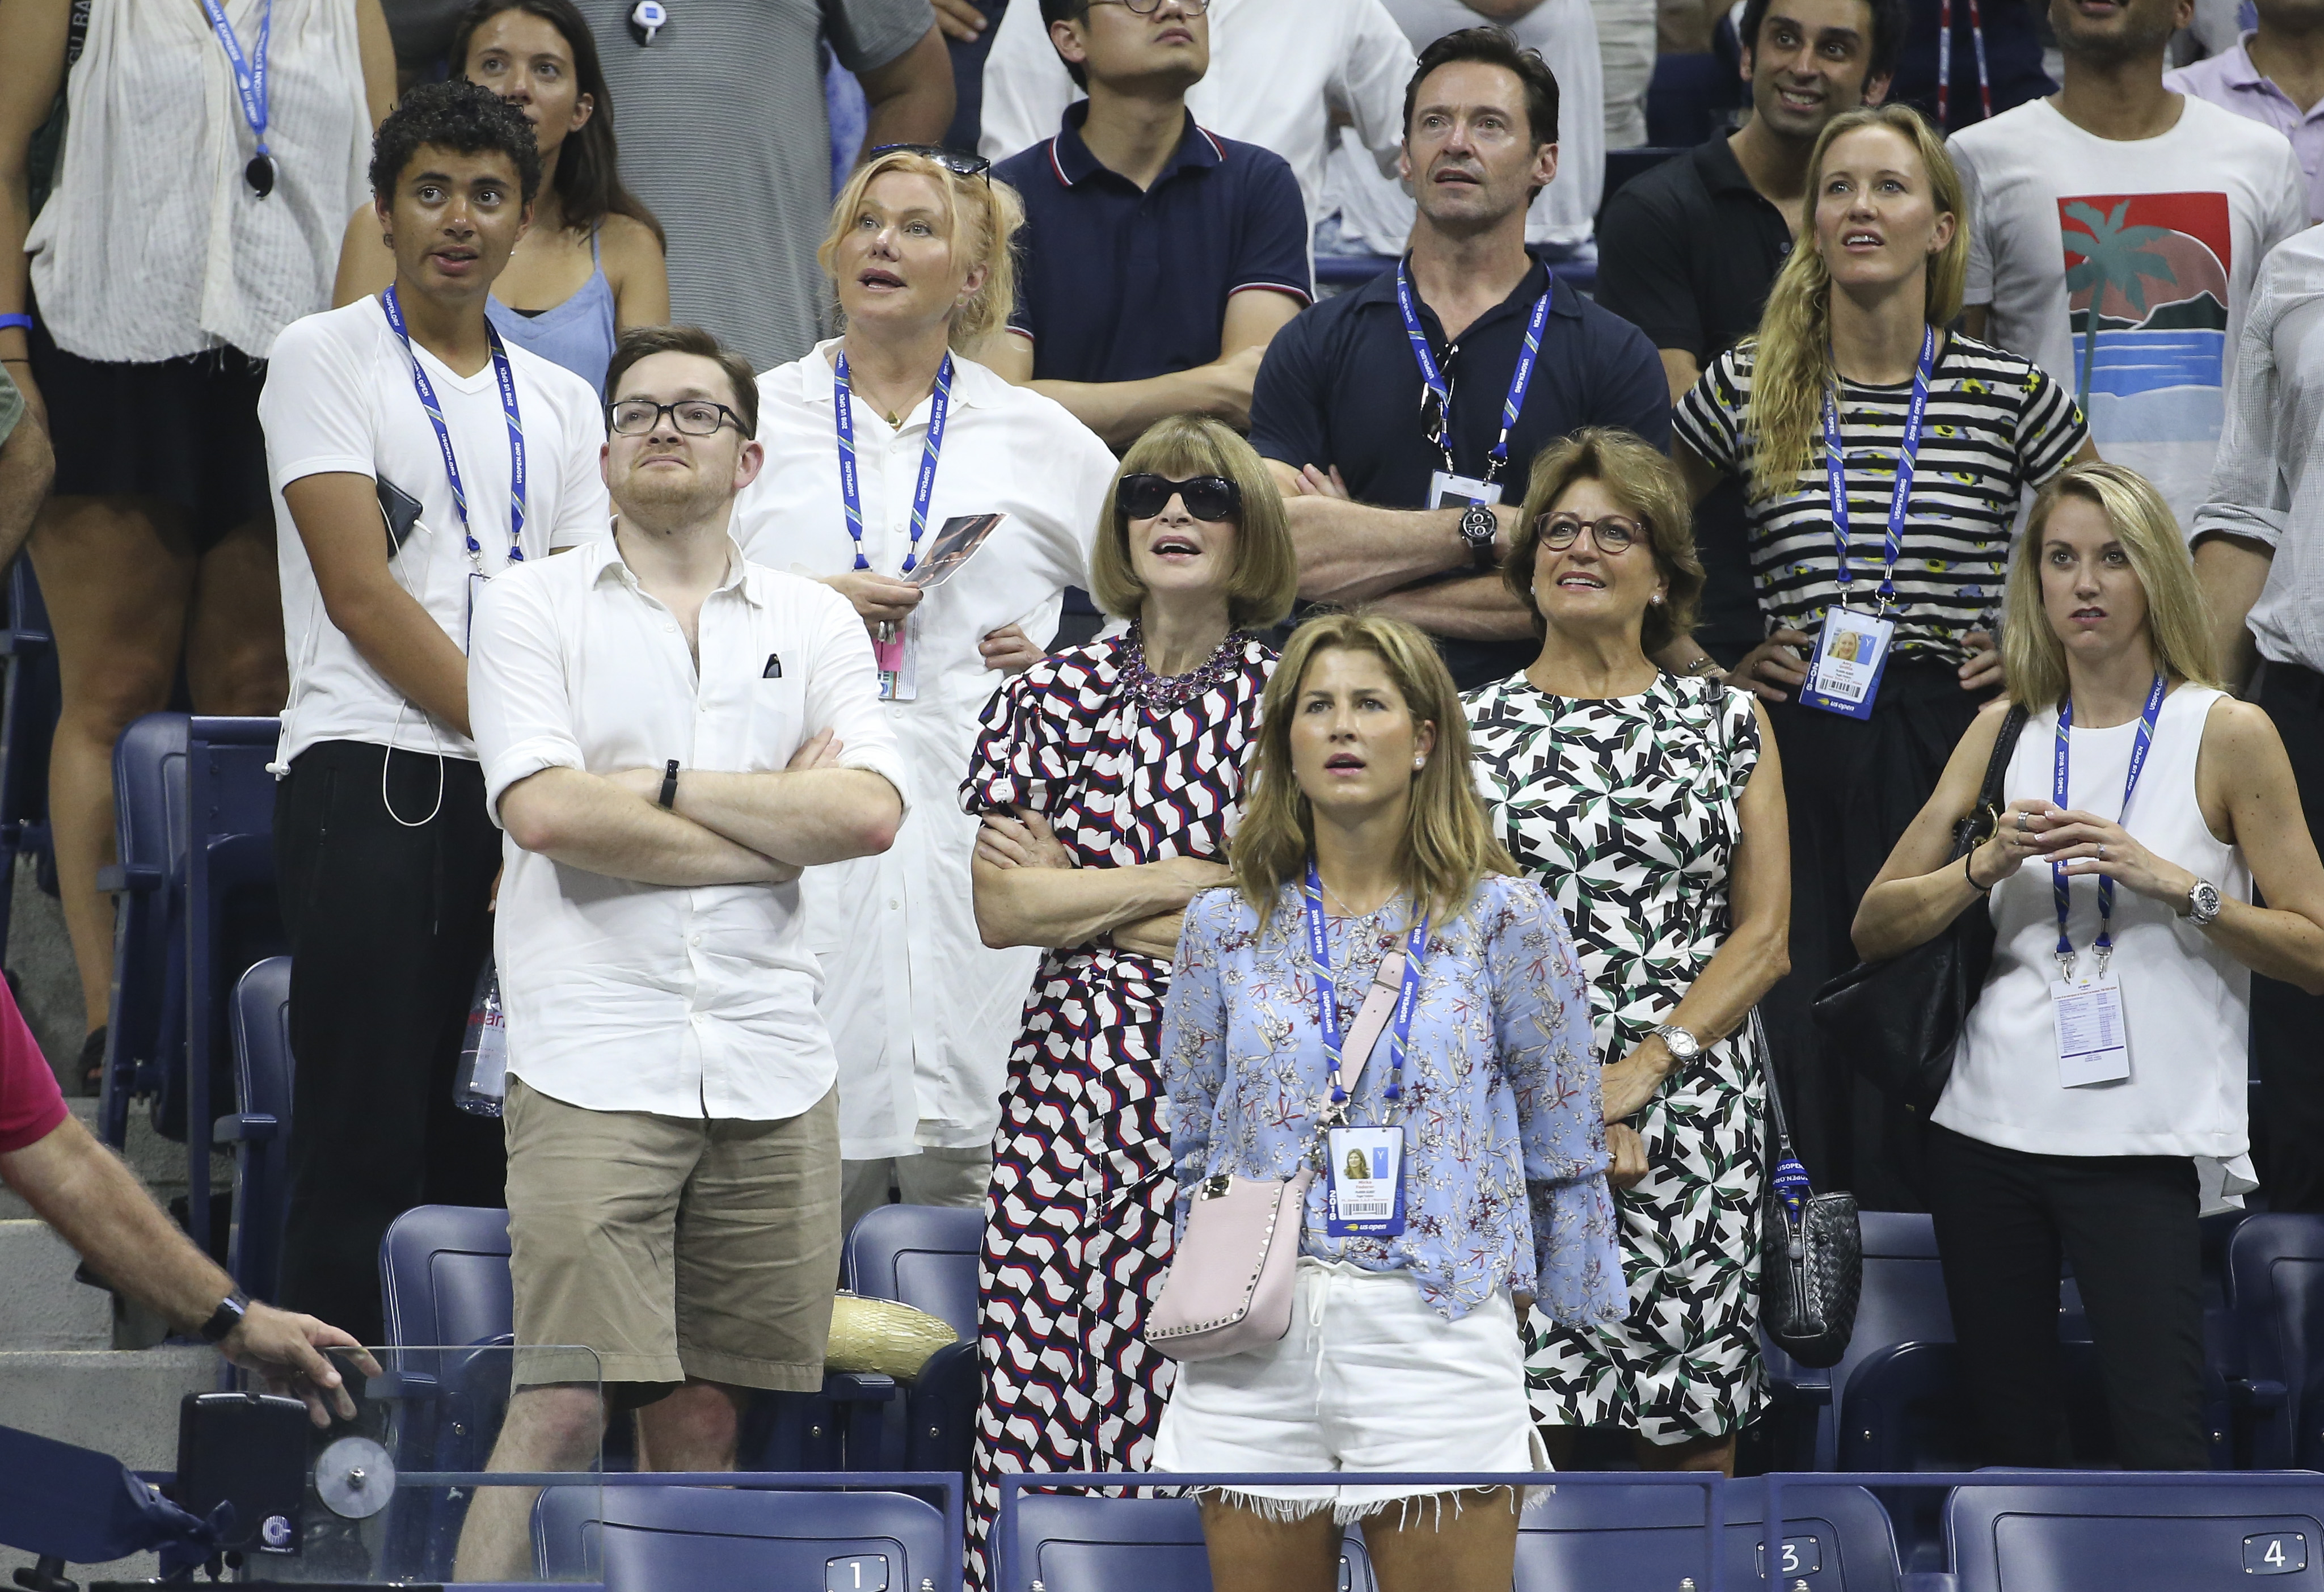 Hugh Jackman, Deborra-lee Furness, and Oscar Jackman (left) at the 2018 tennis US Open in New York City on August 28, 2018 | Source: Getty Images